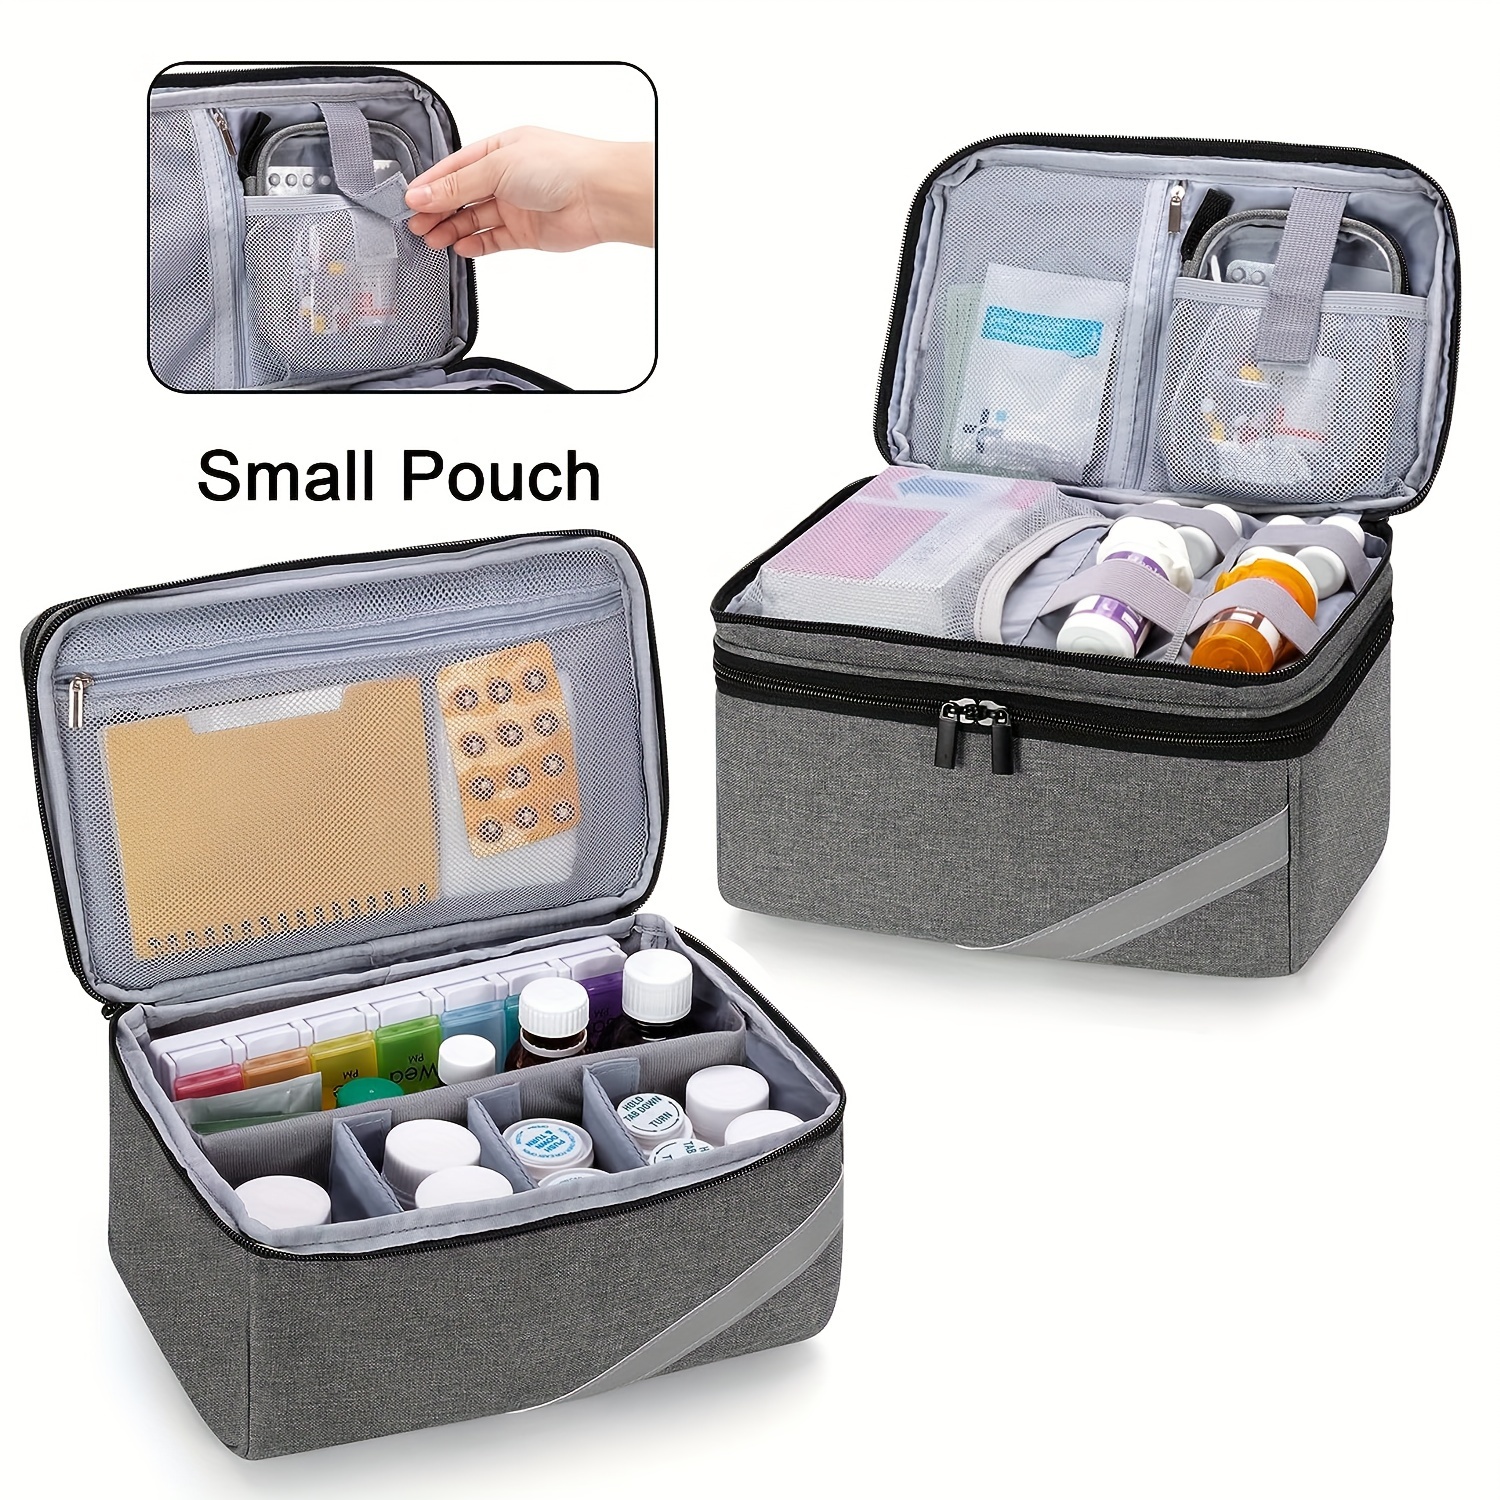 Large Capacity Medicine Storage Bag Empty, Pill Bottle Organizer Storage  With Portable Small Pouch, Home First Aid Kit For Emergency Medication  Travel Bag